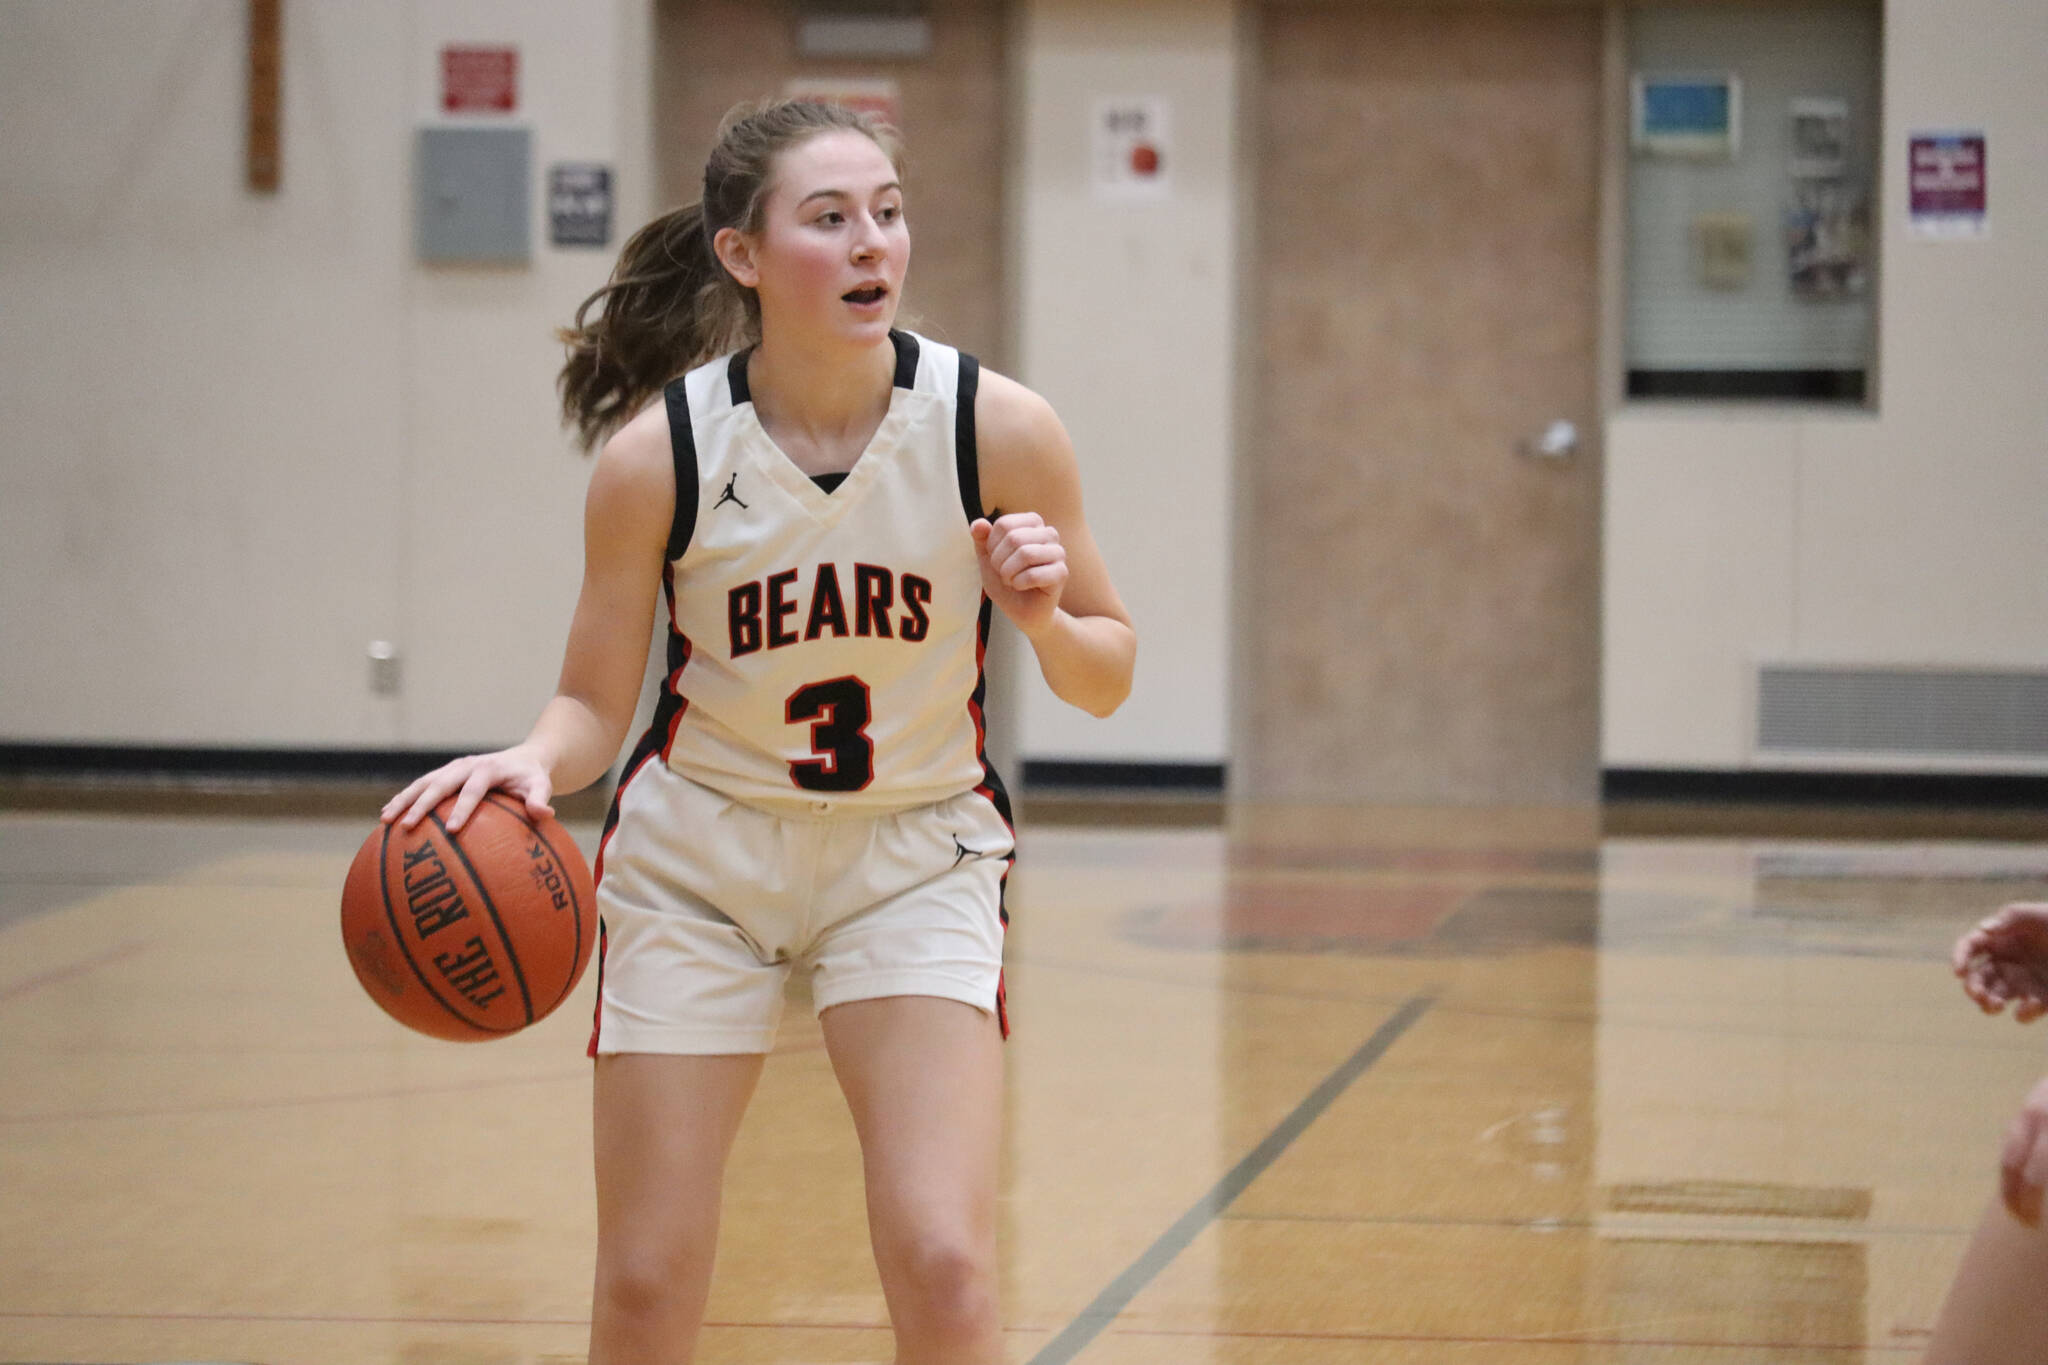 JDHS senior Carlynn Casperson takes the ball down court on Saturday against Ketchikan during an at home conference game. Casperson would hit her first 3-point shot of the season during the third quarter, helping her team secure the win against the Lady Knights. (Jonson Kuhn / Juneau Empire)